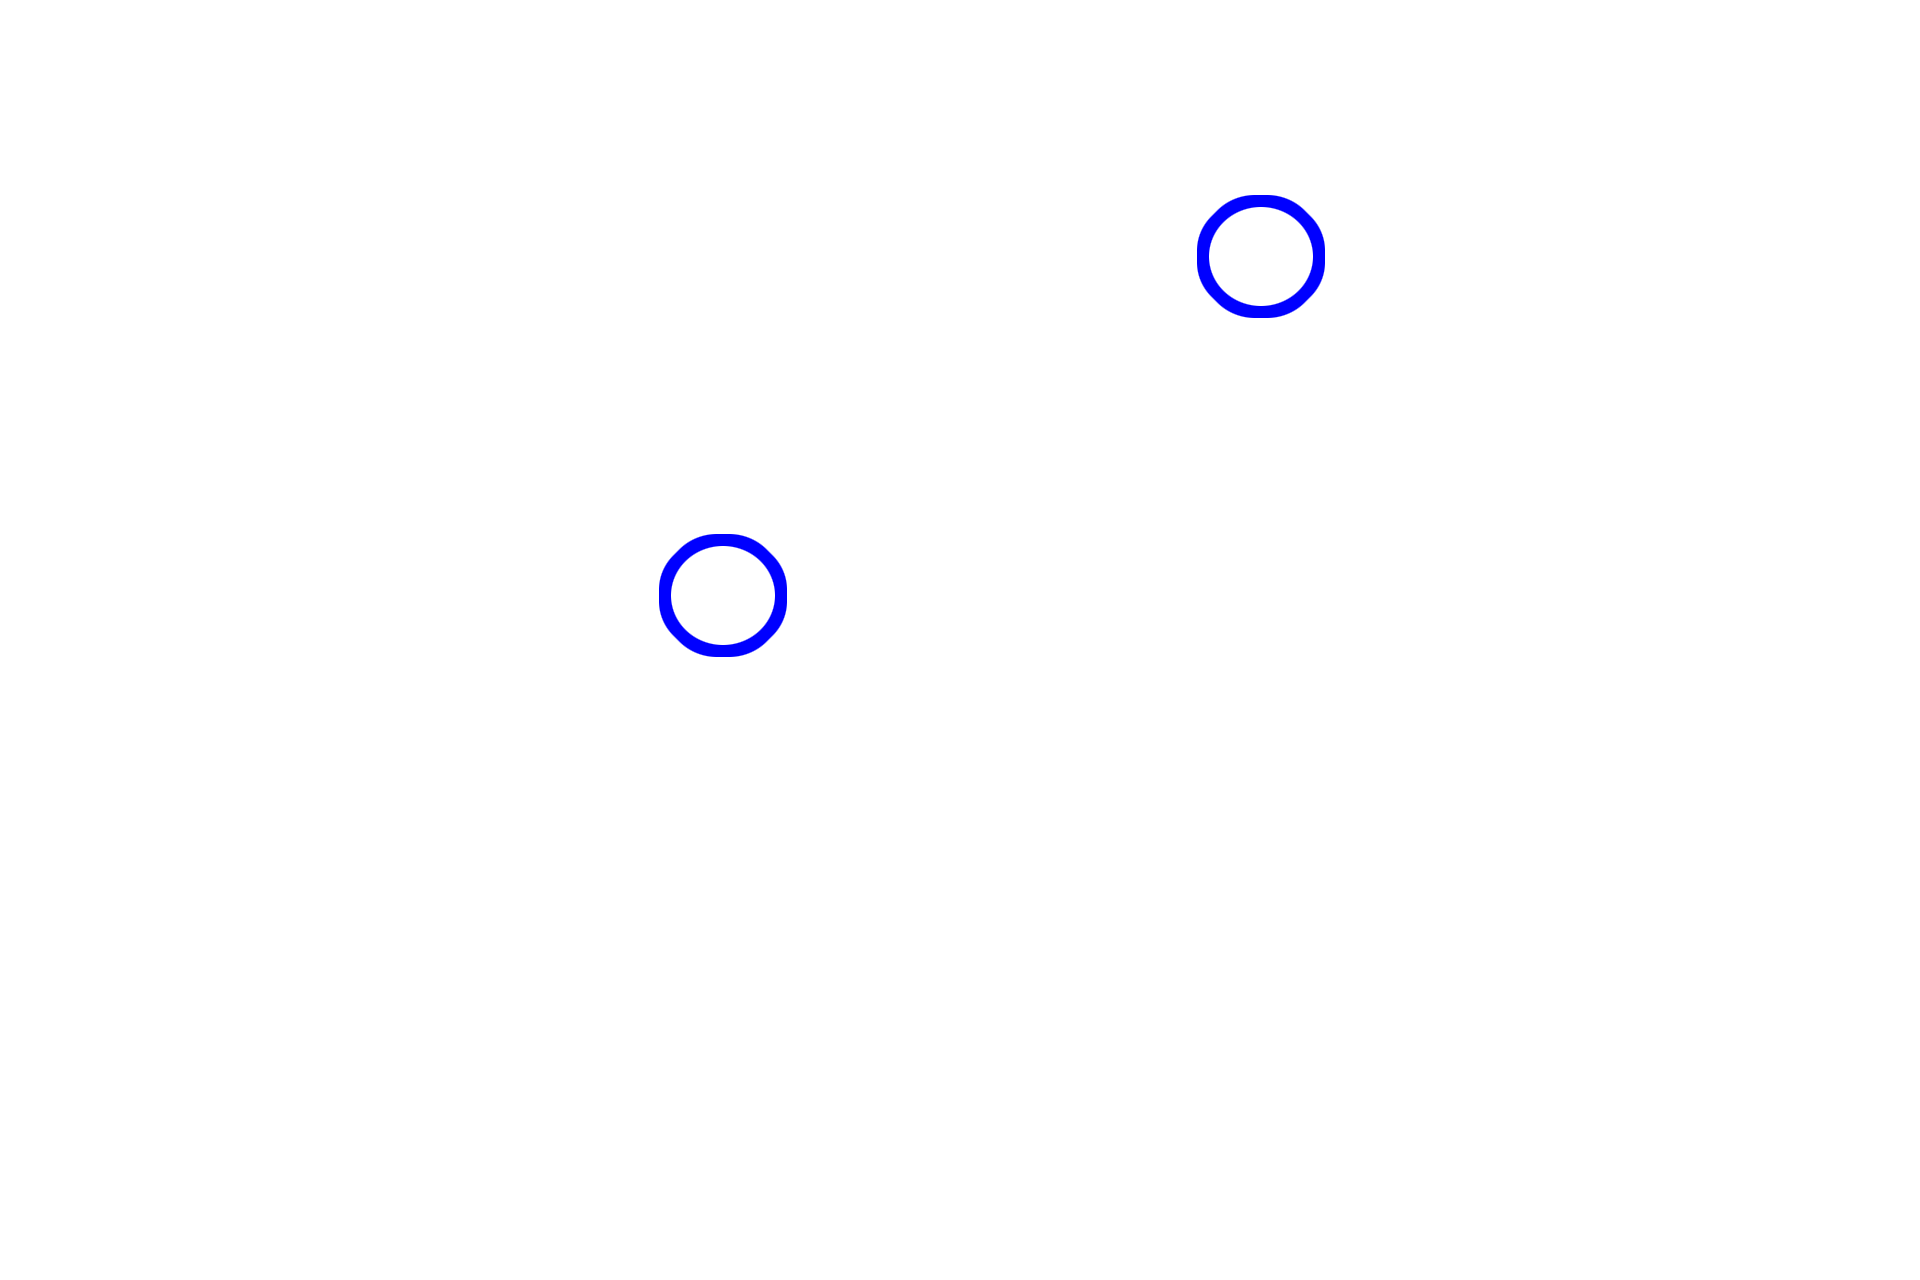 Centrosomes <p>Cytokinesis in meiosis I results in the formation of two daughter cells, each with a single set of chromosomes (haploid, 1N).  The nuclear envelope has reformed and chromosomal DNA may decondense somewhat, but quickly recondenses.  Cells rapidly progress into prophase of meiosis II without passing through a second S phase.</p>
